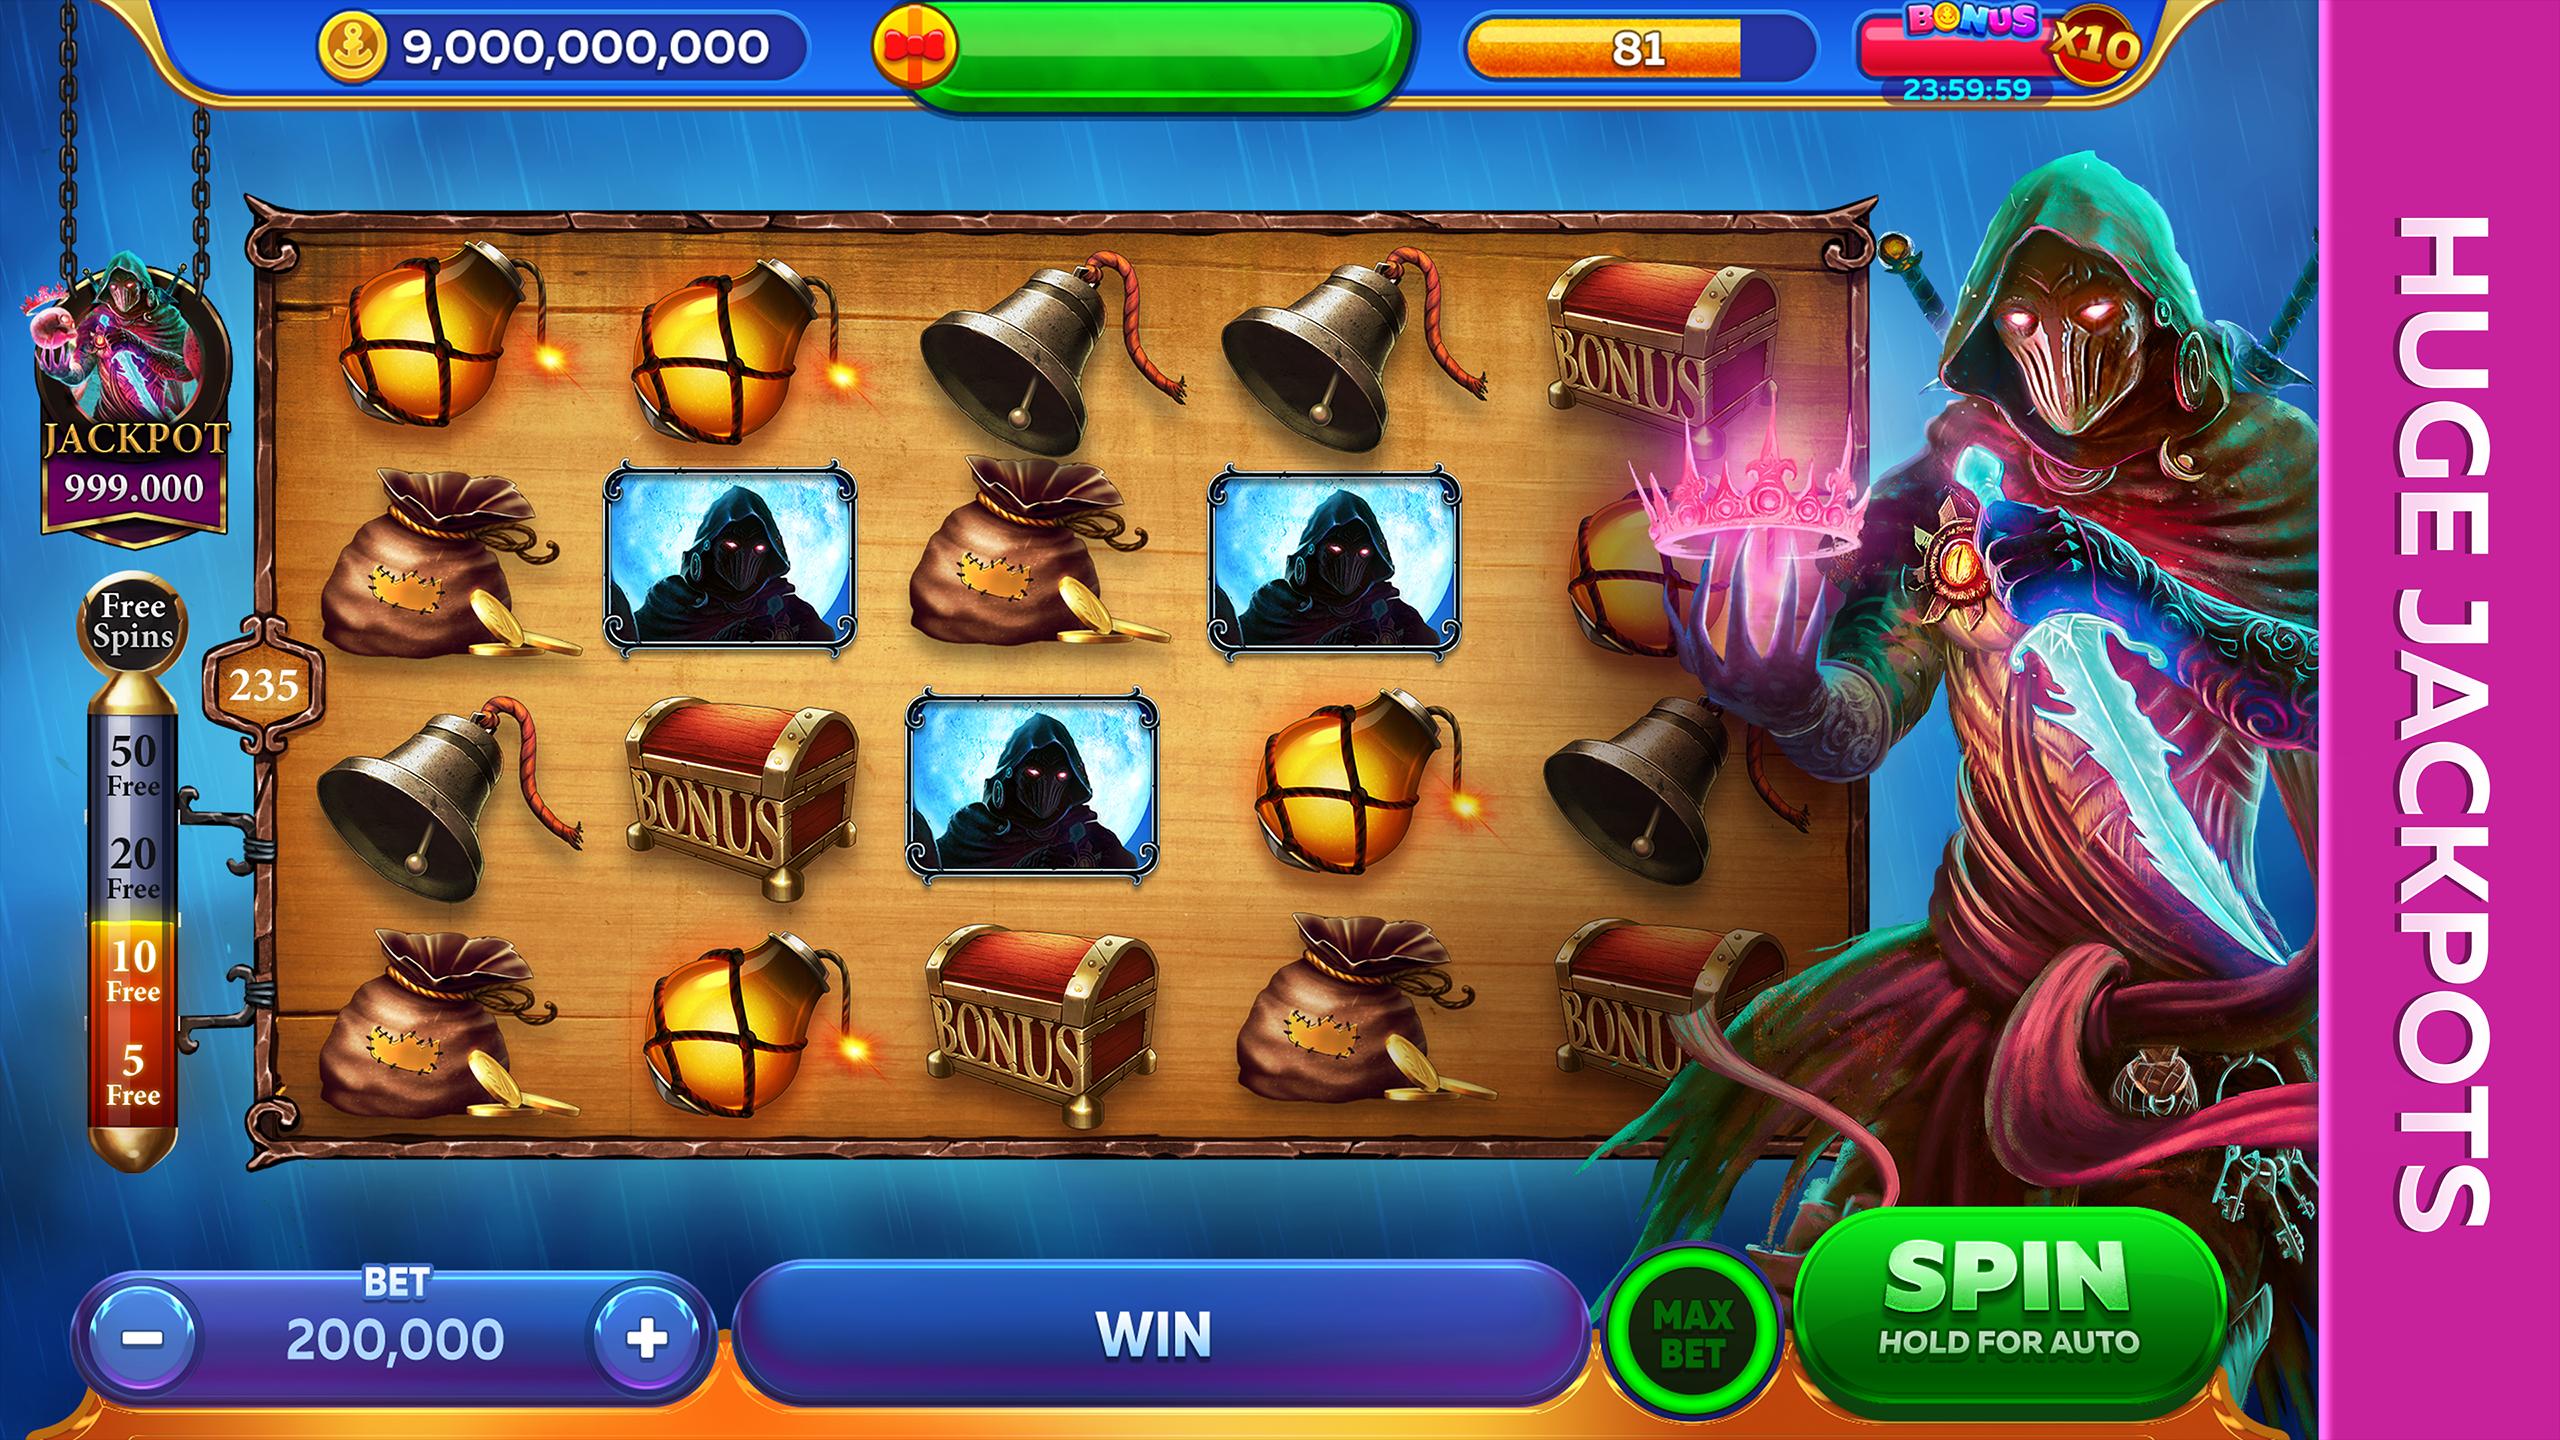 Slots Journey Cruise Casino 777 Vegas Games For Android Apk Download - guest 777 roblox